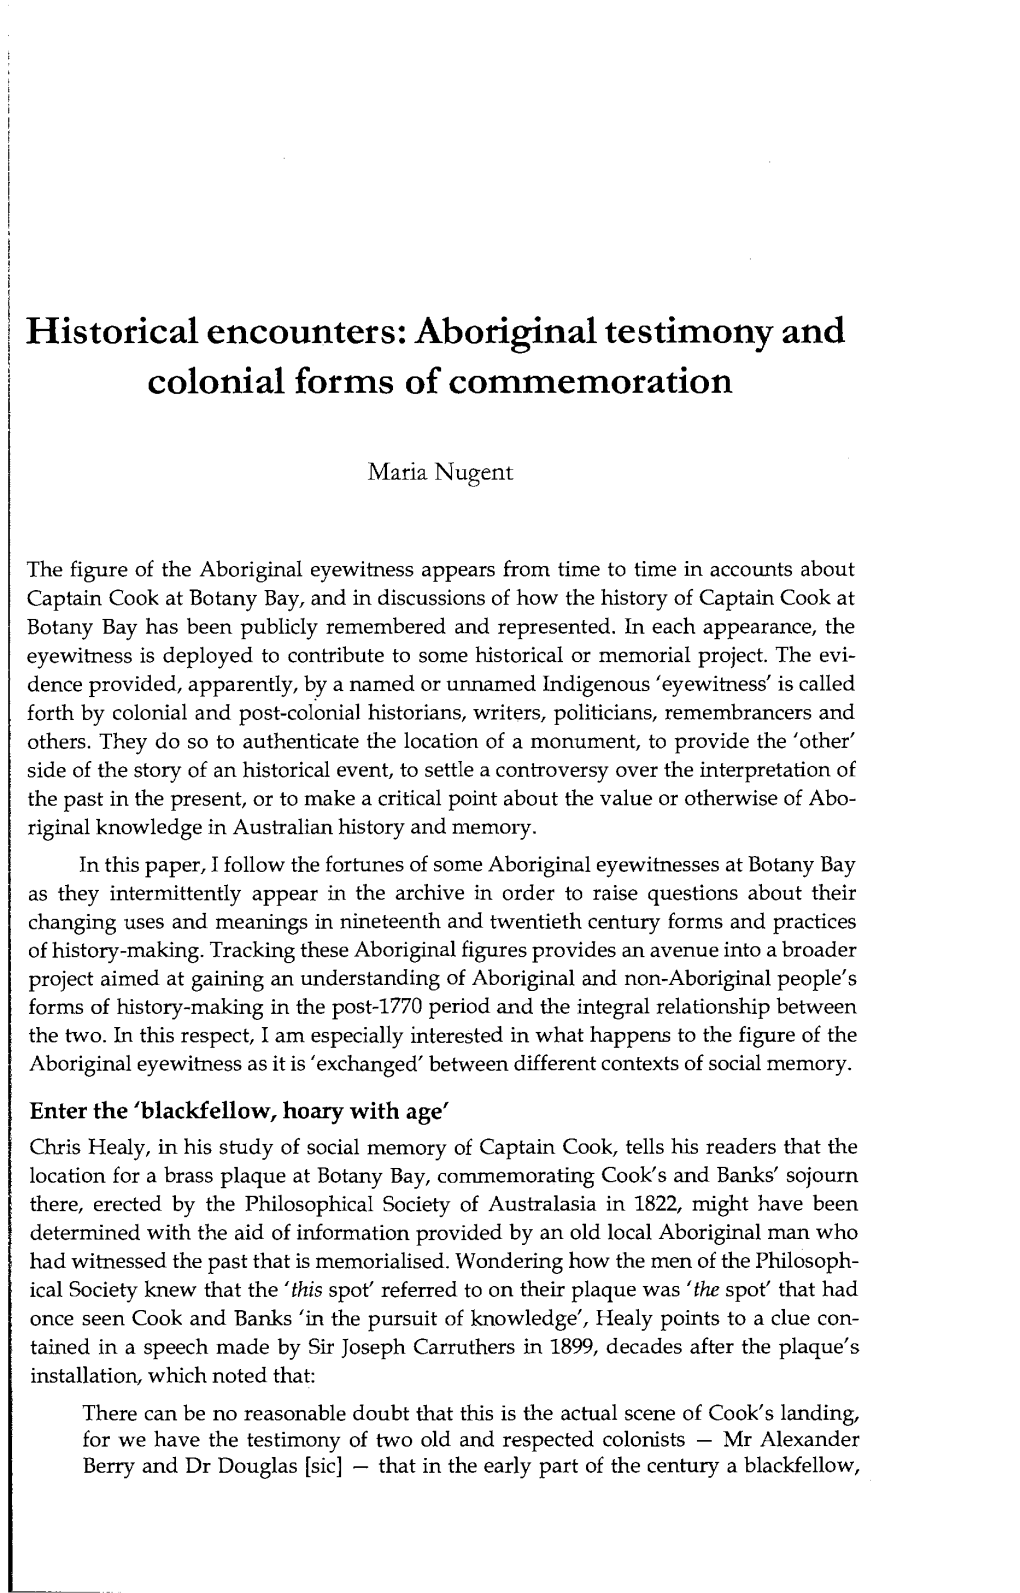 Aboriginal Testimony and Colonial Forms of Commemoration